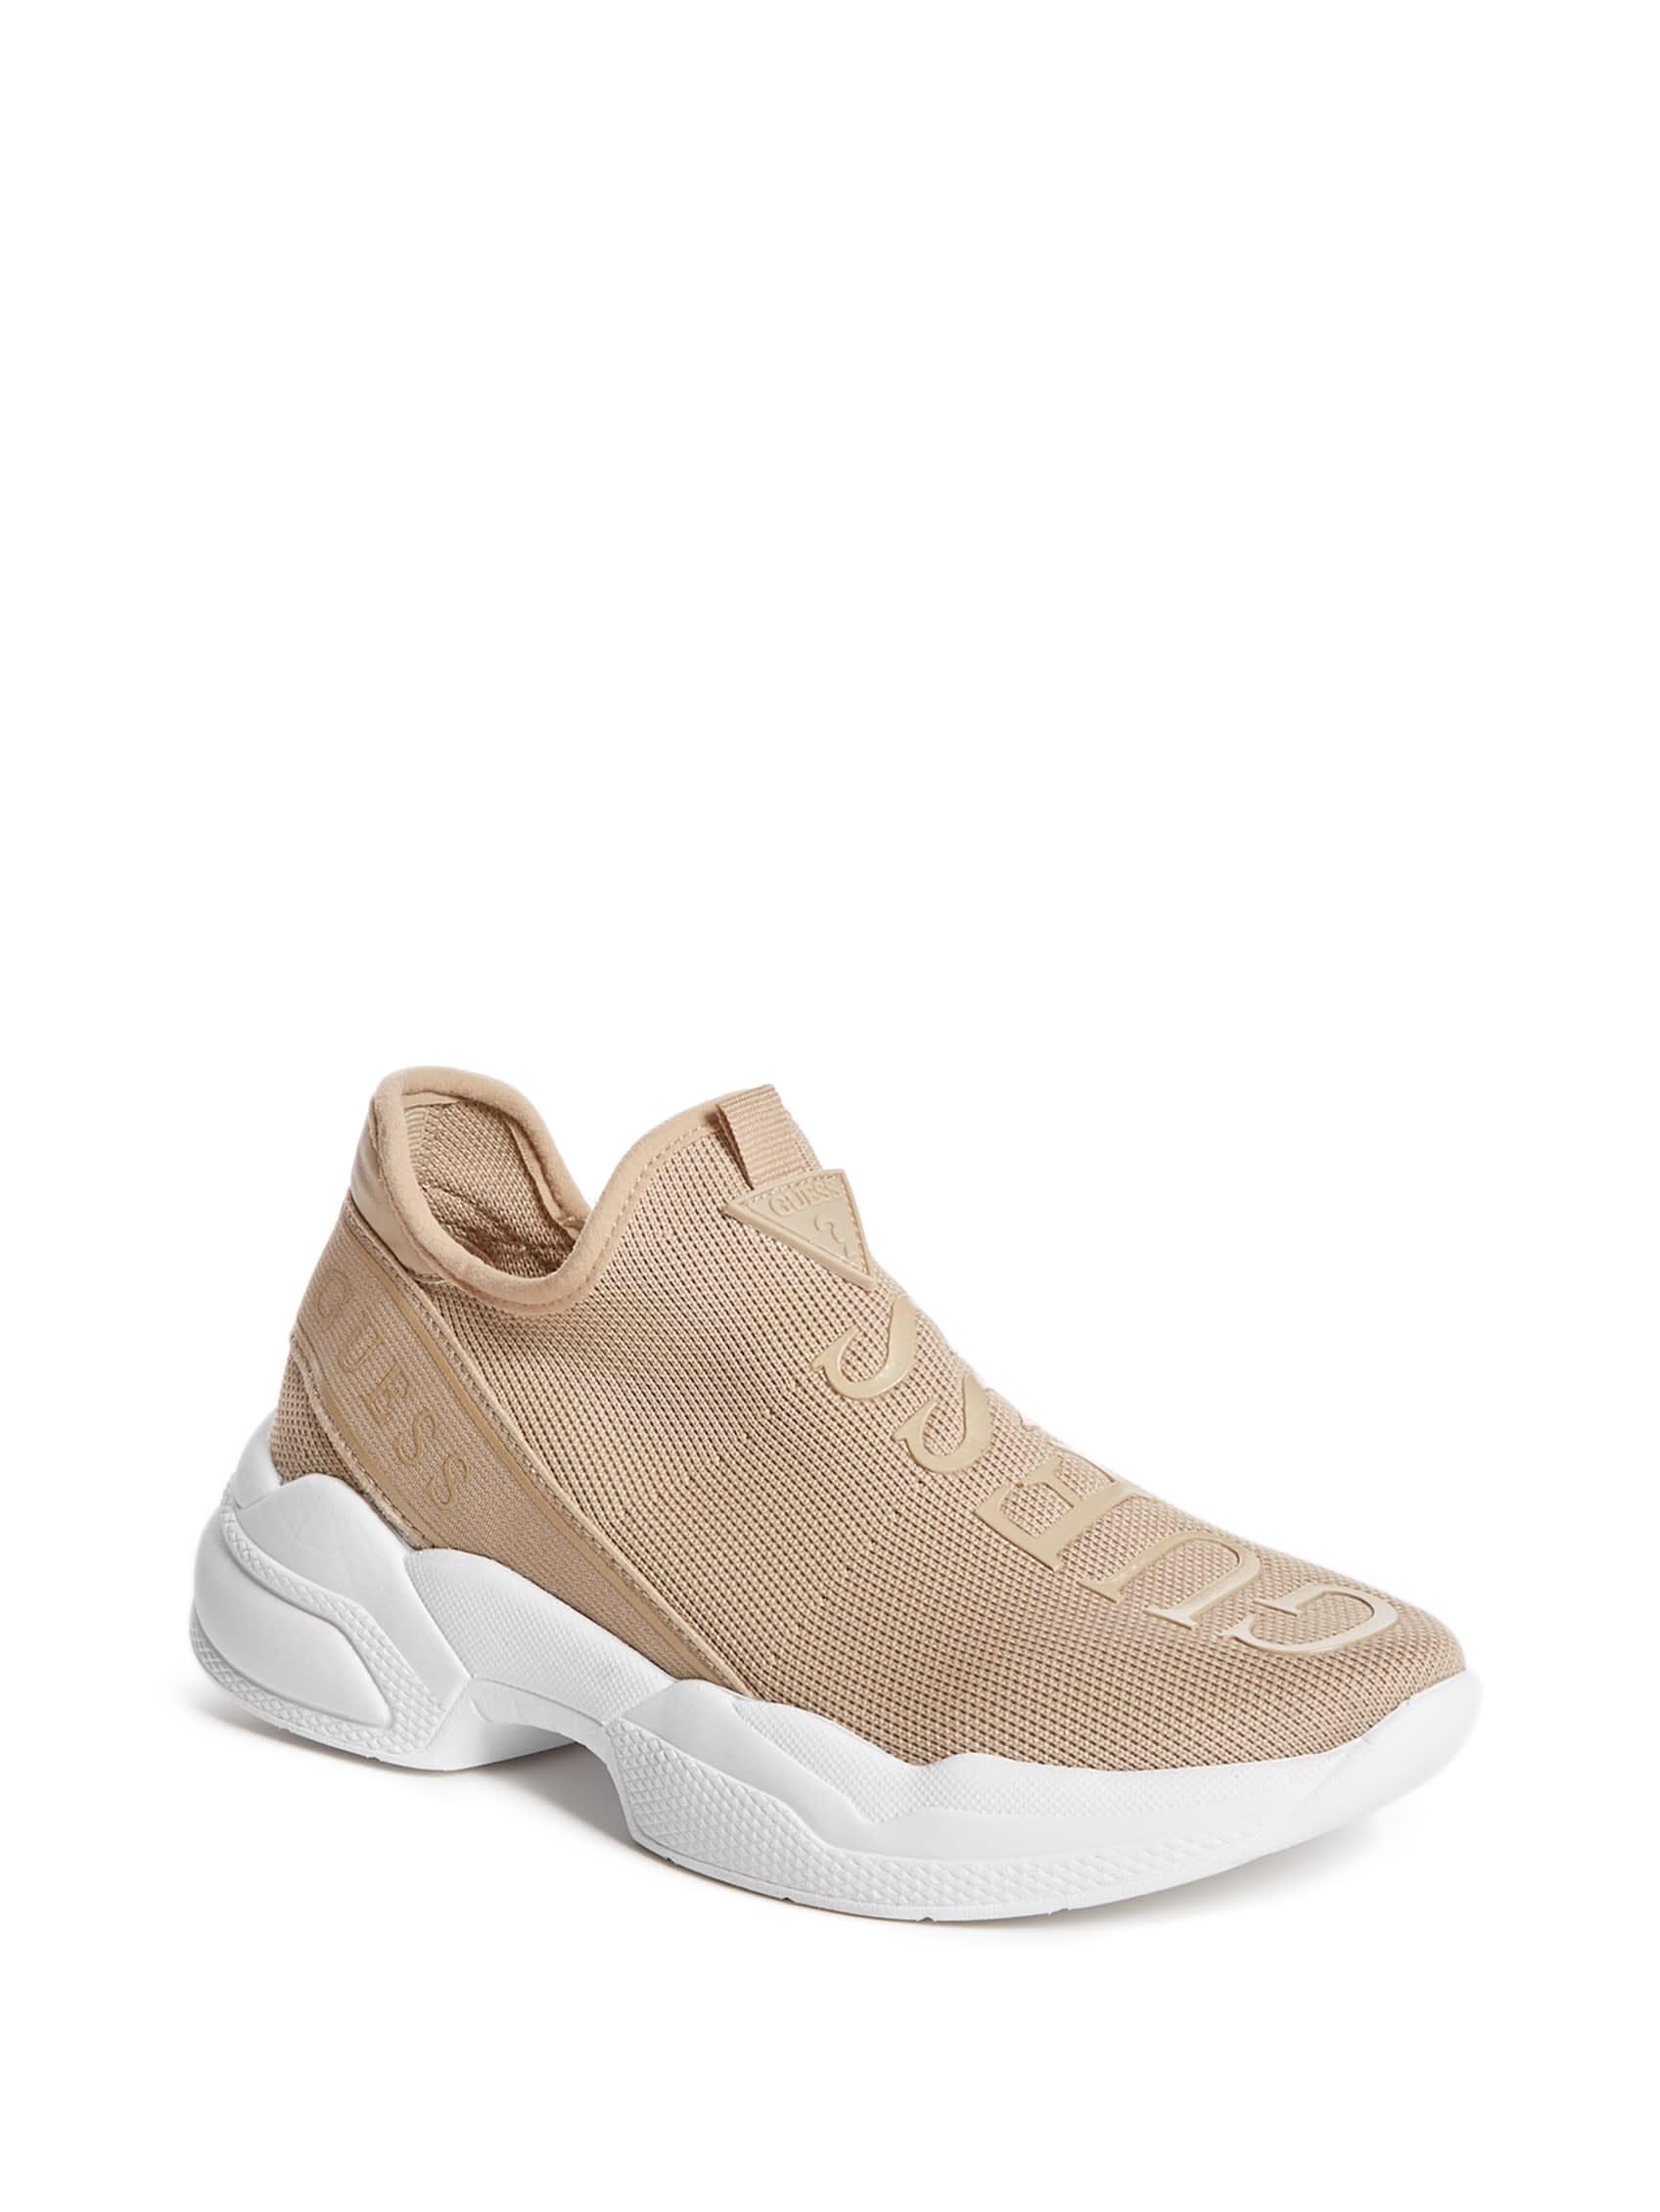 Guess Factory Lyanna Knit Logo Sneakers in Natural | Lyst